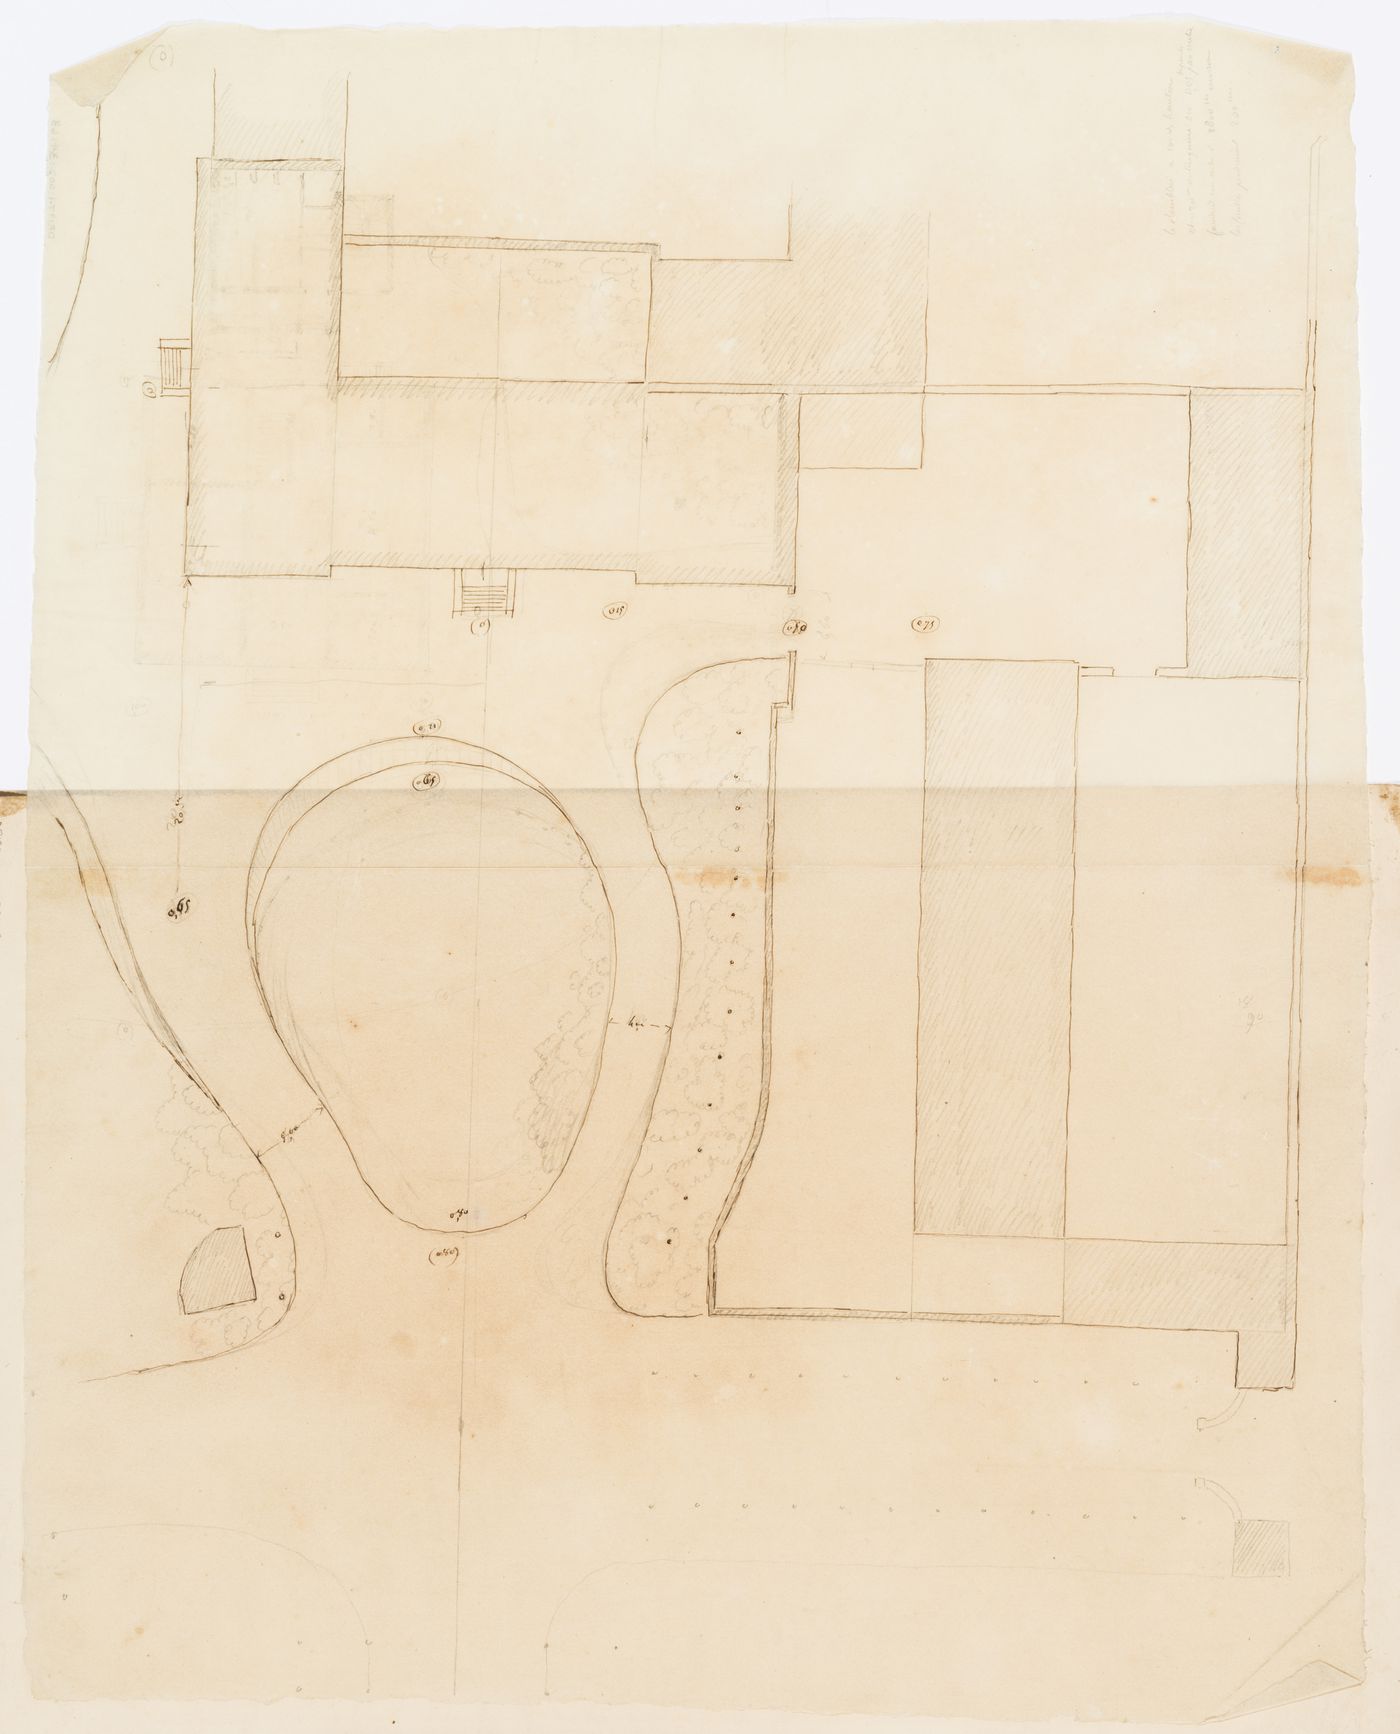 Project no. 9 for a country house for comte Treilhard: Site plan